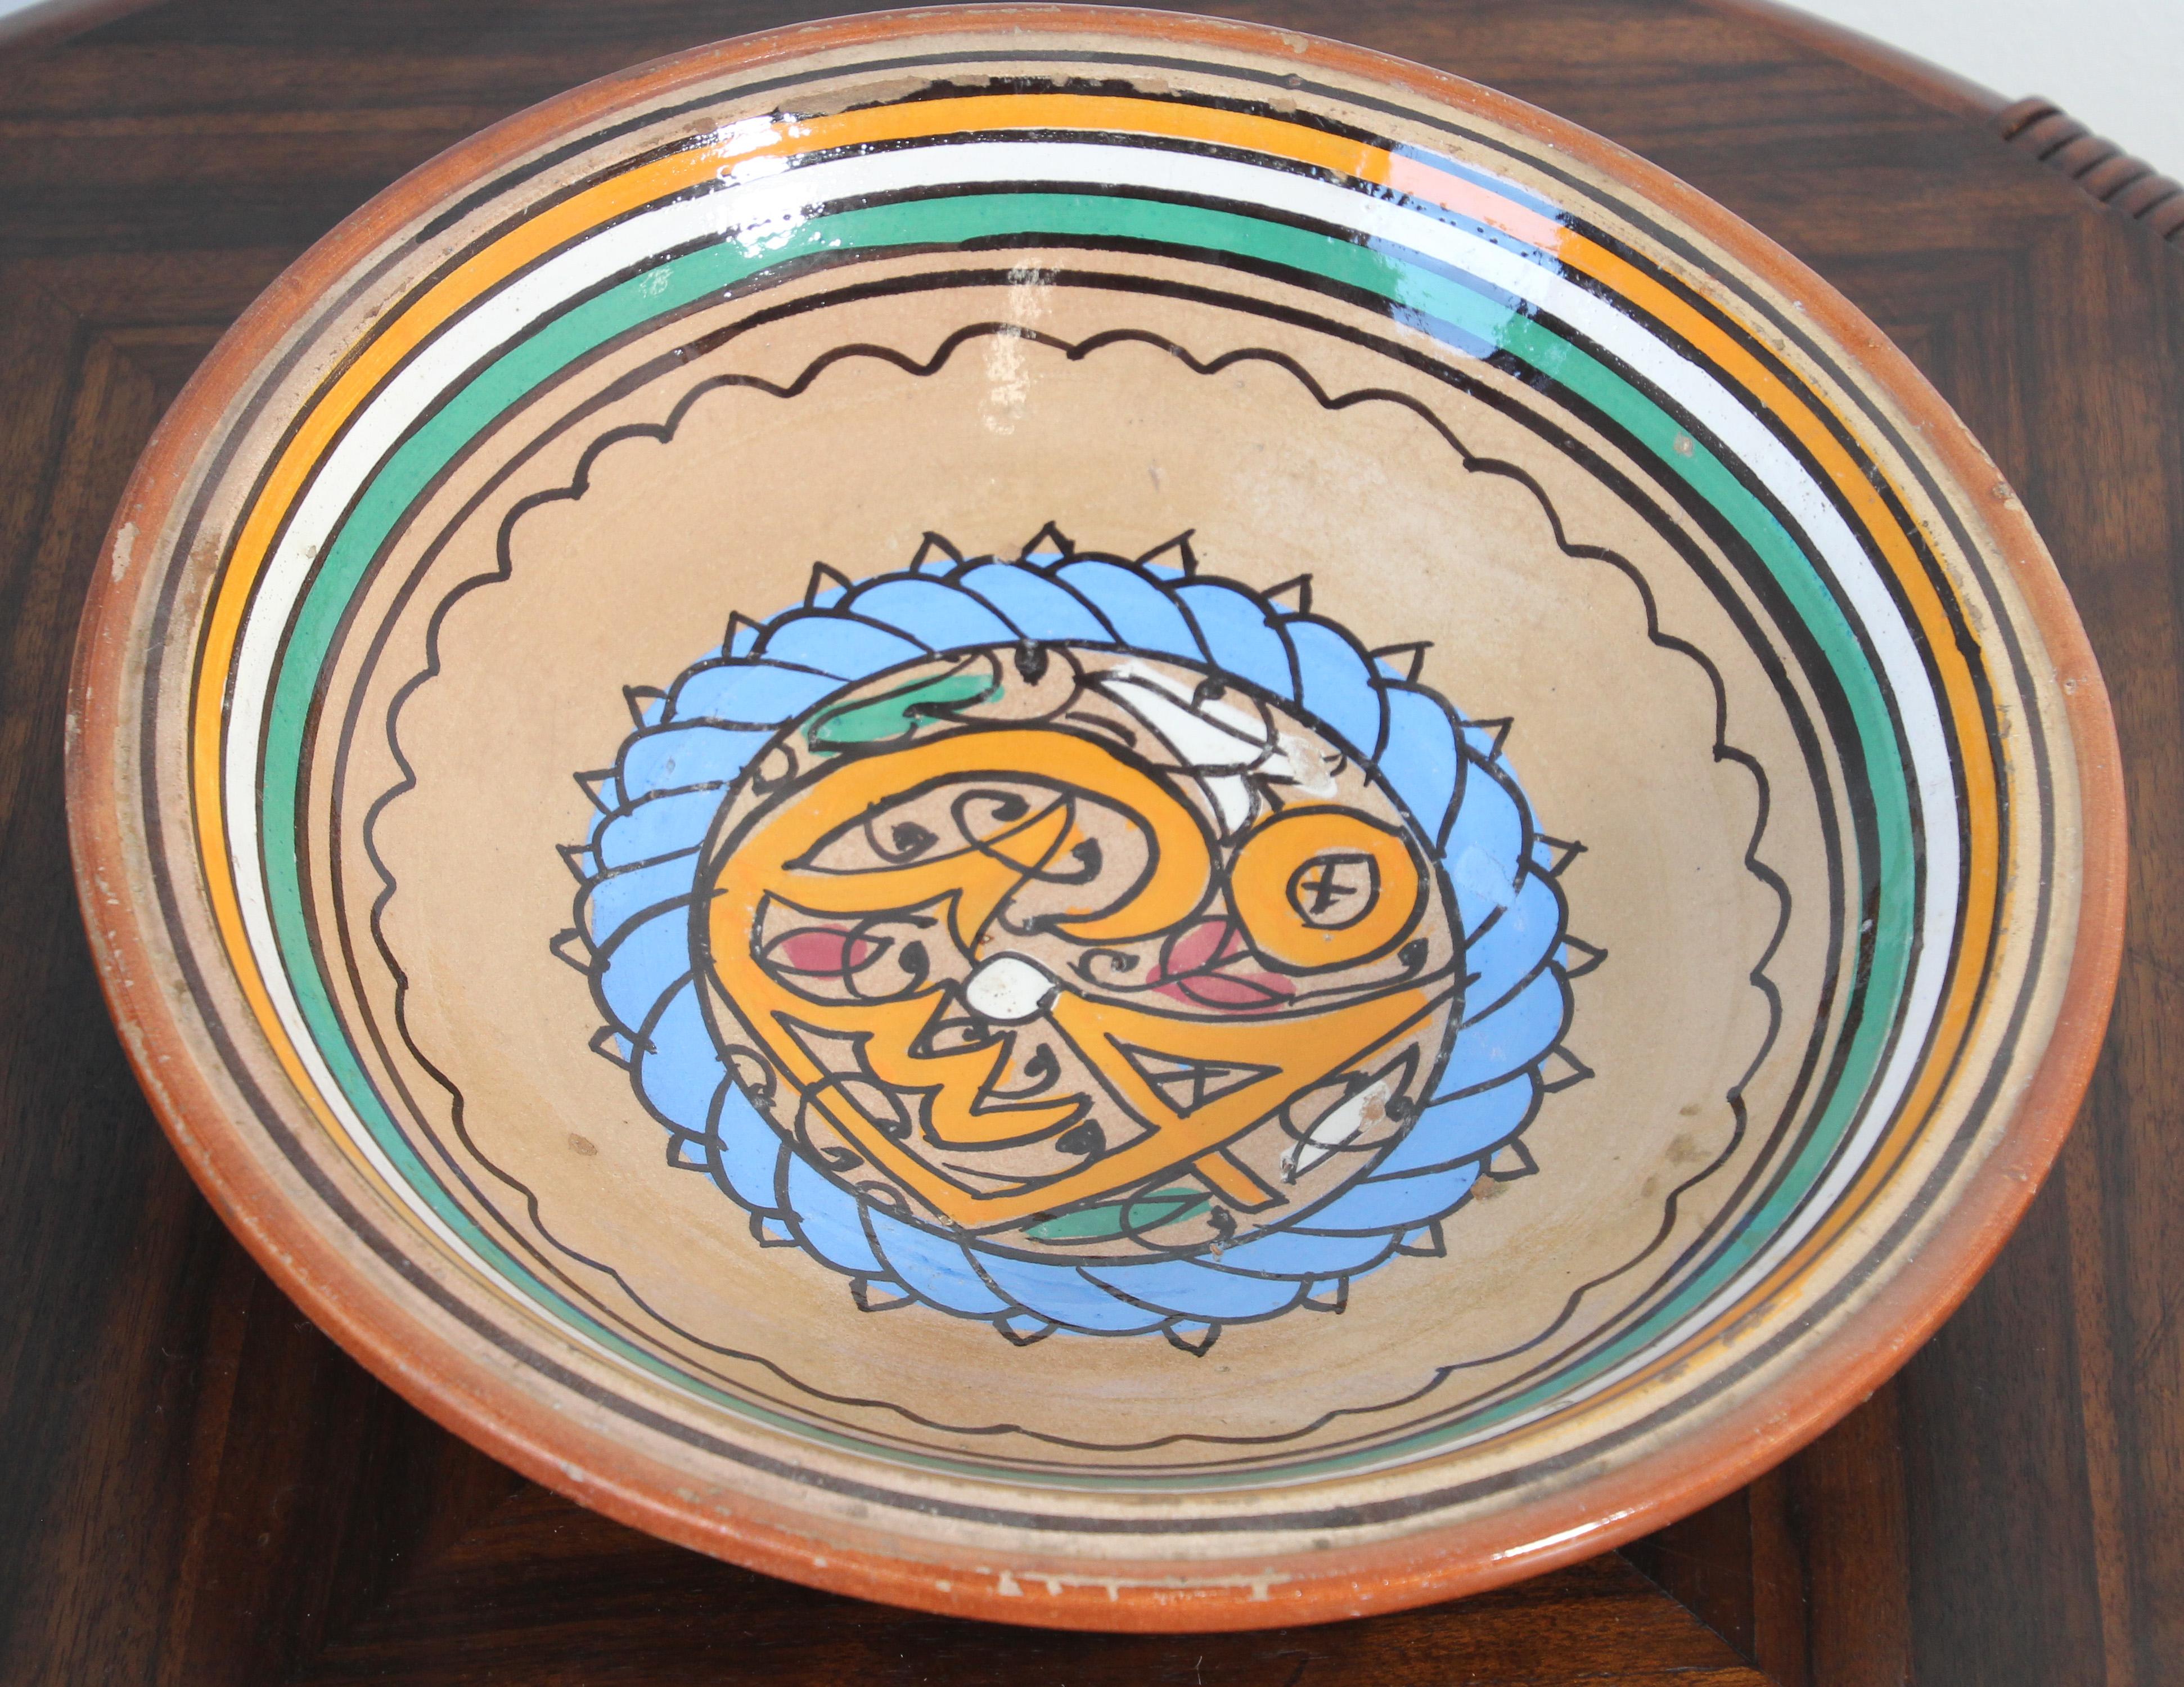 Moroccan under-glazed painted pottery bowl, rising on a low foot.
The interior is hand painted with polychrome abstract and Arabic calligraphy design in blue, orange and brown with turquoise accents.
Handcrafted in Morocco by artisan.
Antique 19th